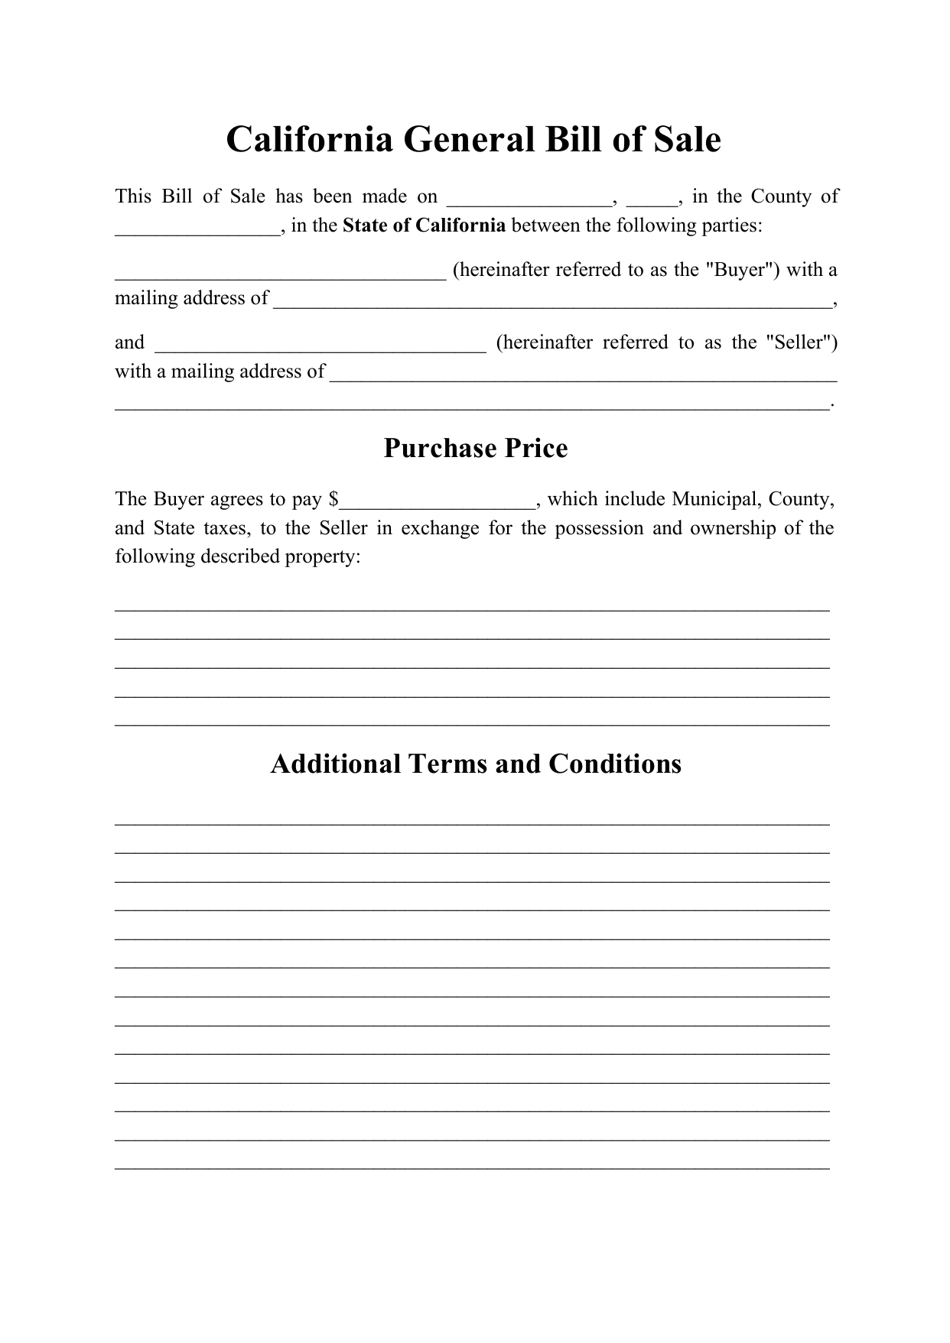 Generic Bill of Sale Form - California, Page 1